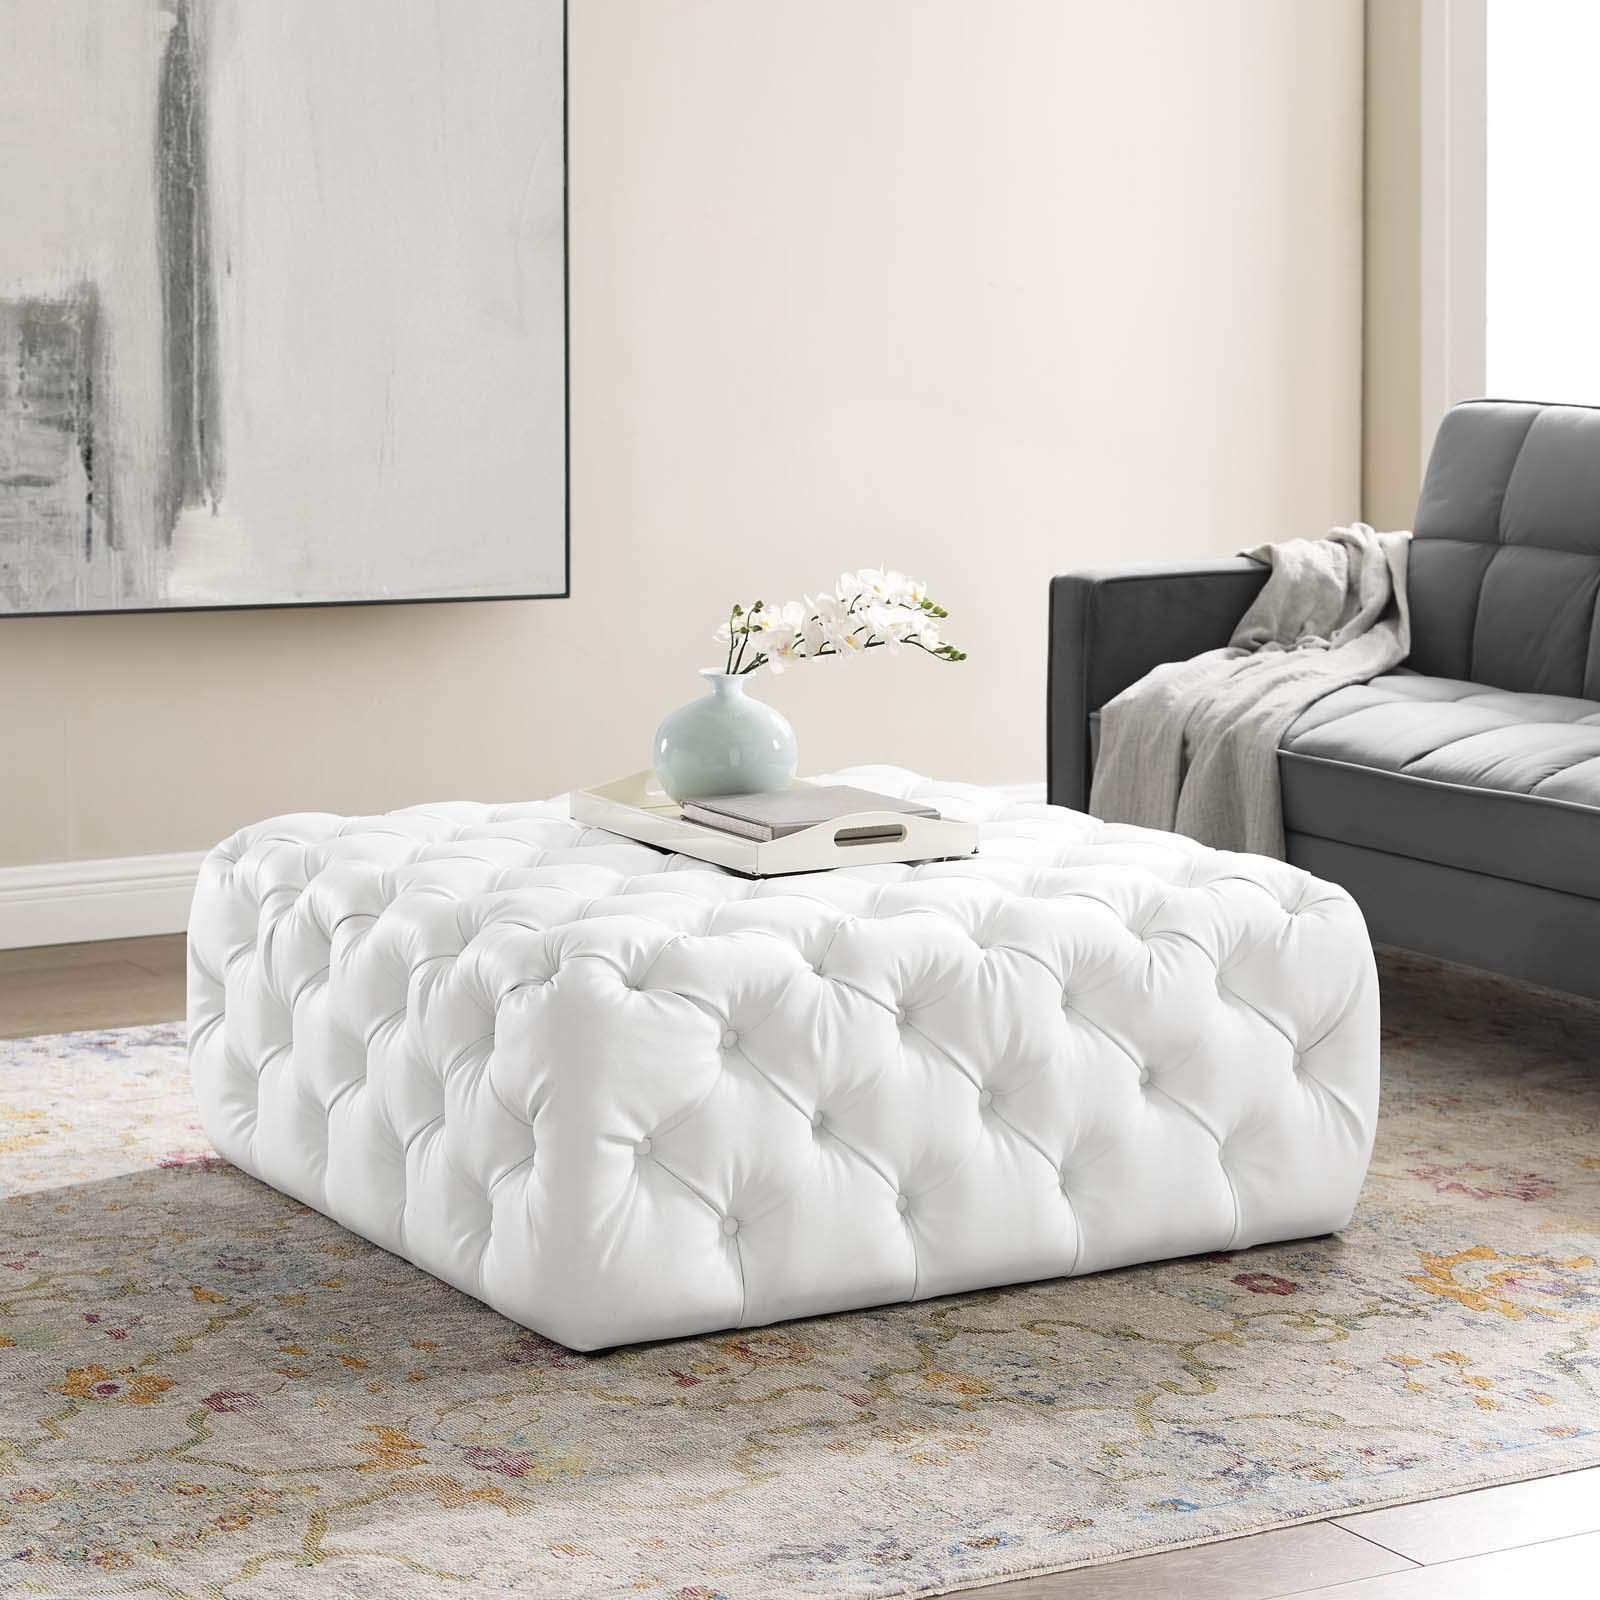 Trendy Upholstered Ottomans Intended For Amazon: Modway Amour Tufted Vegan Leather Large Upholstered Ottoman In  White, Square : Home & Kitchen (View 9 of 10)